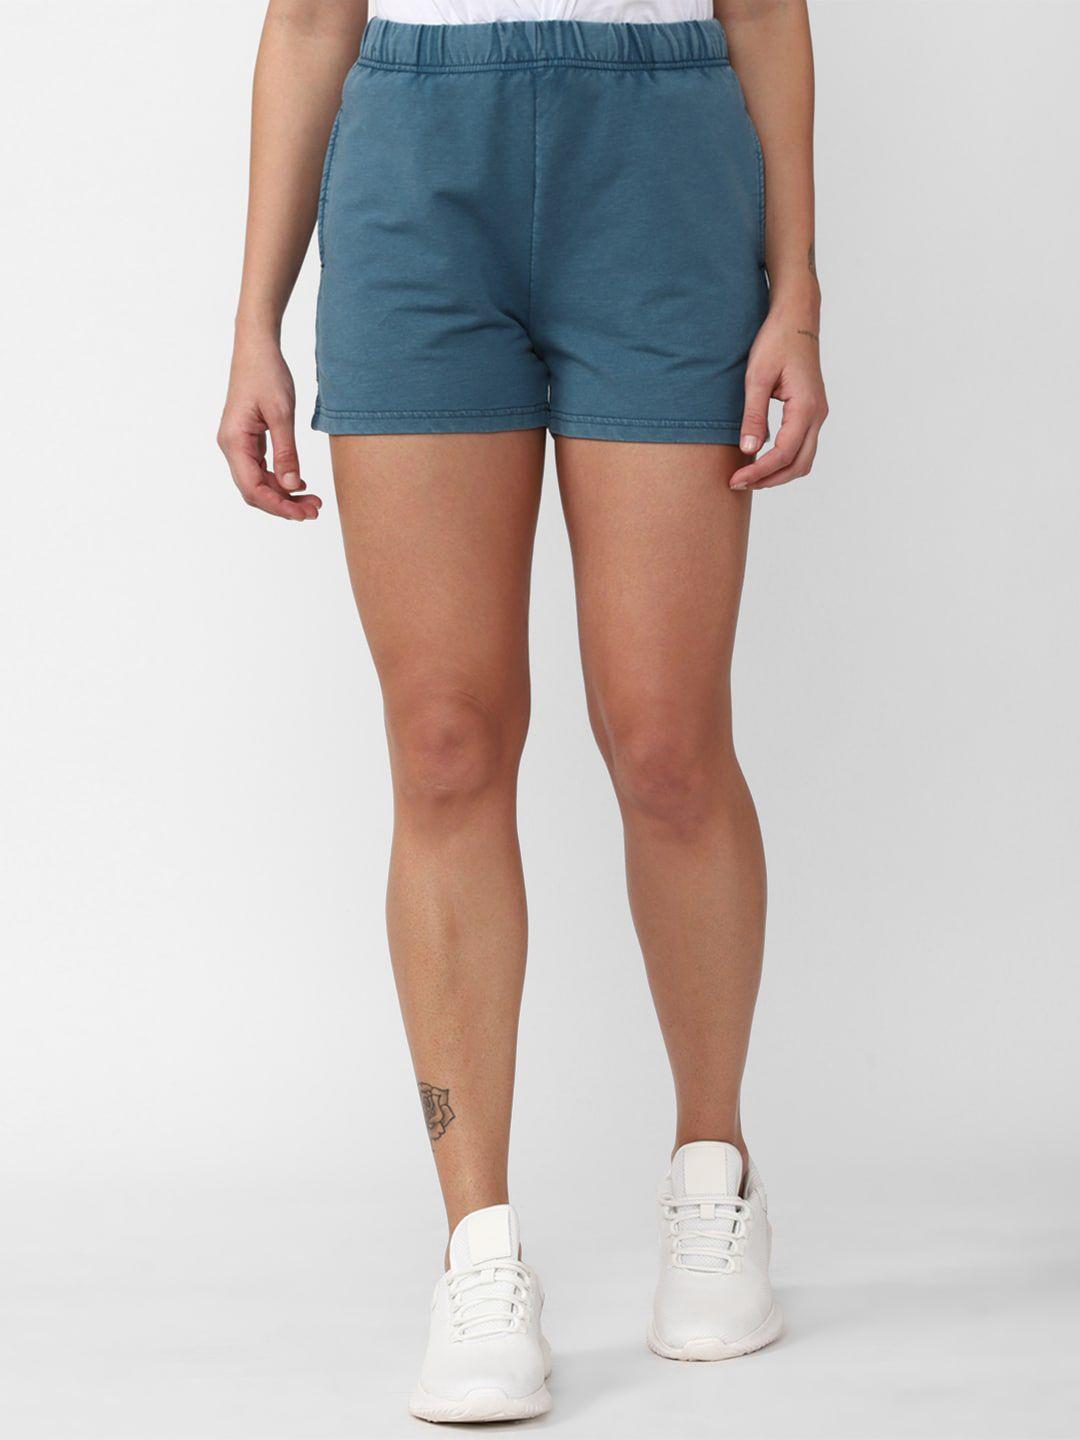 forever 21 women blue solid hot pants shorts